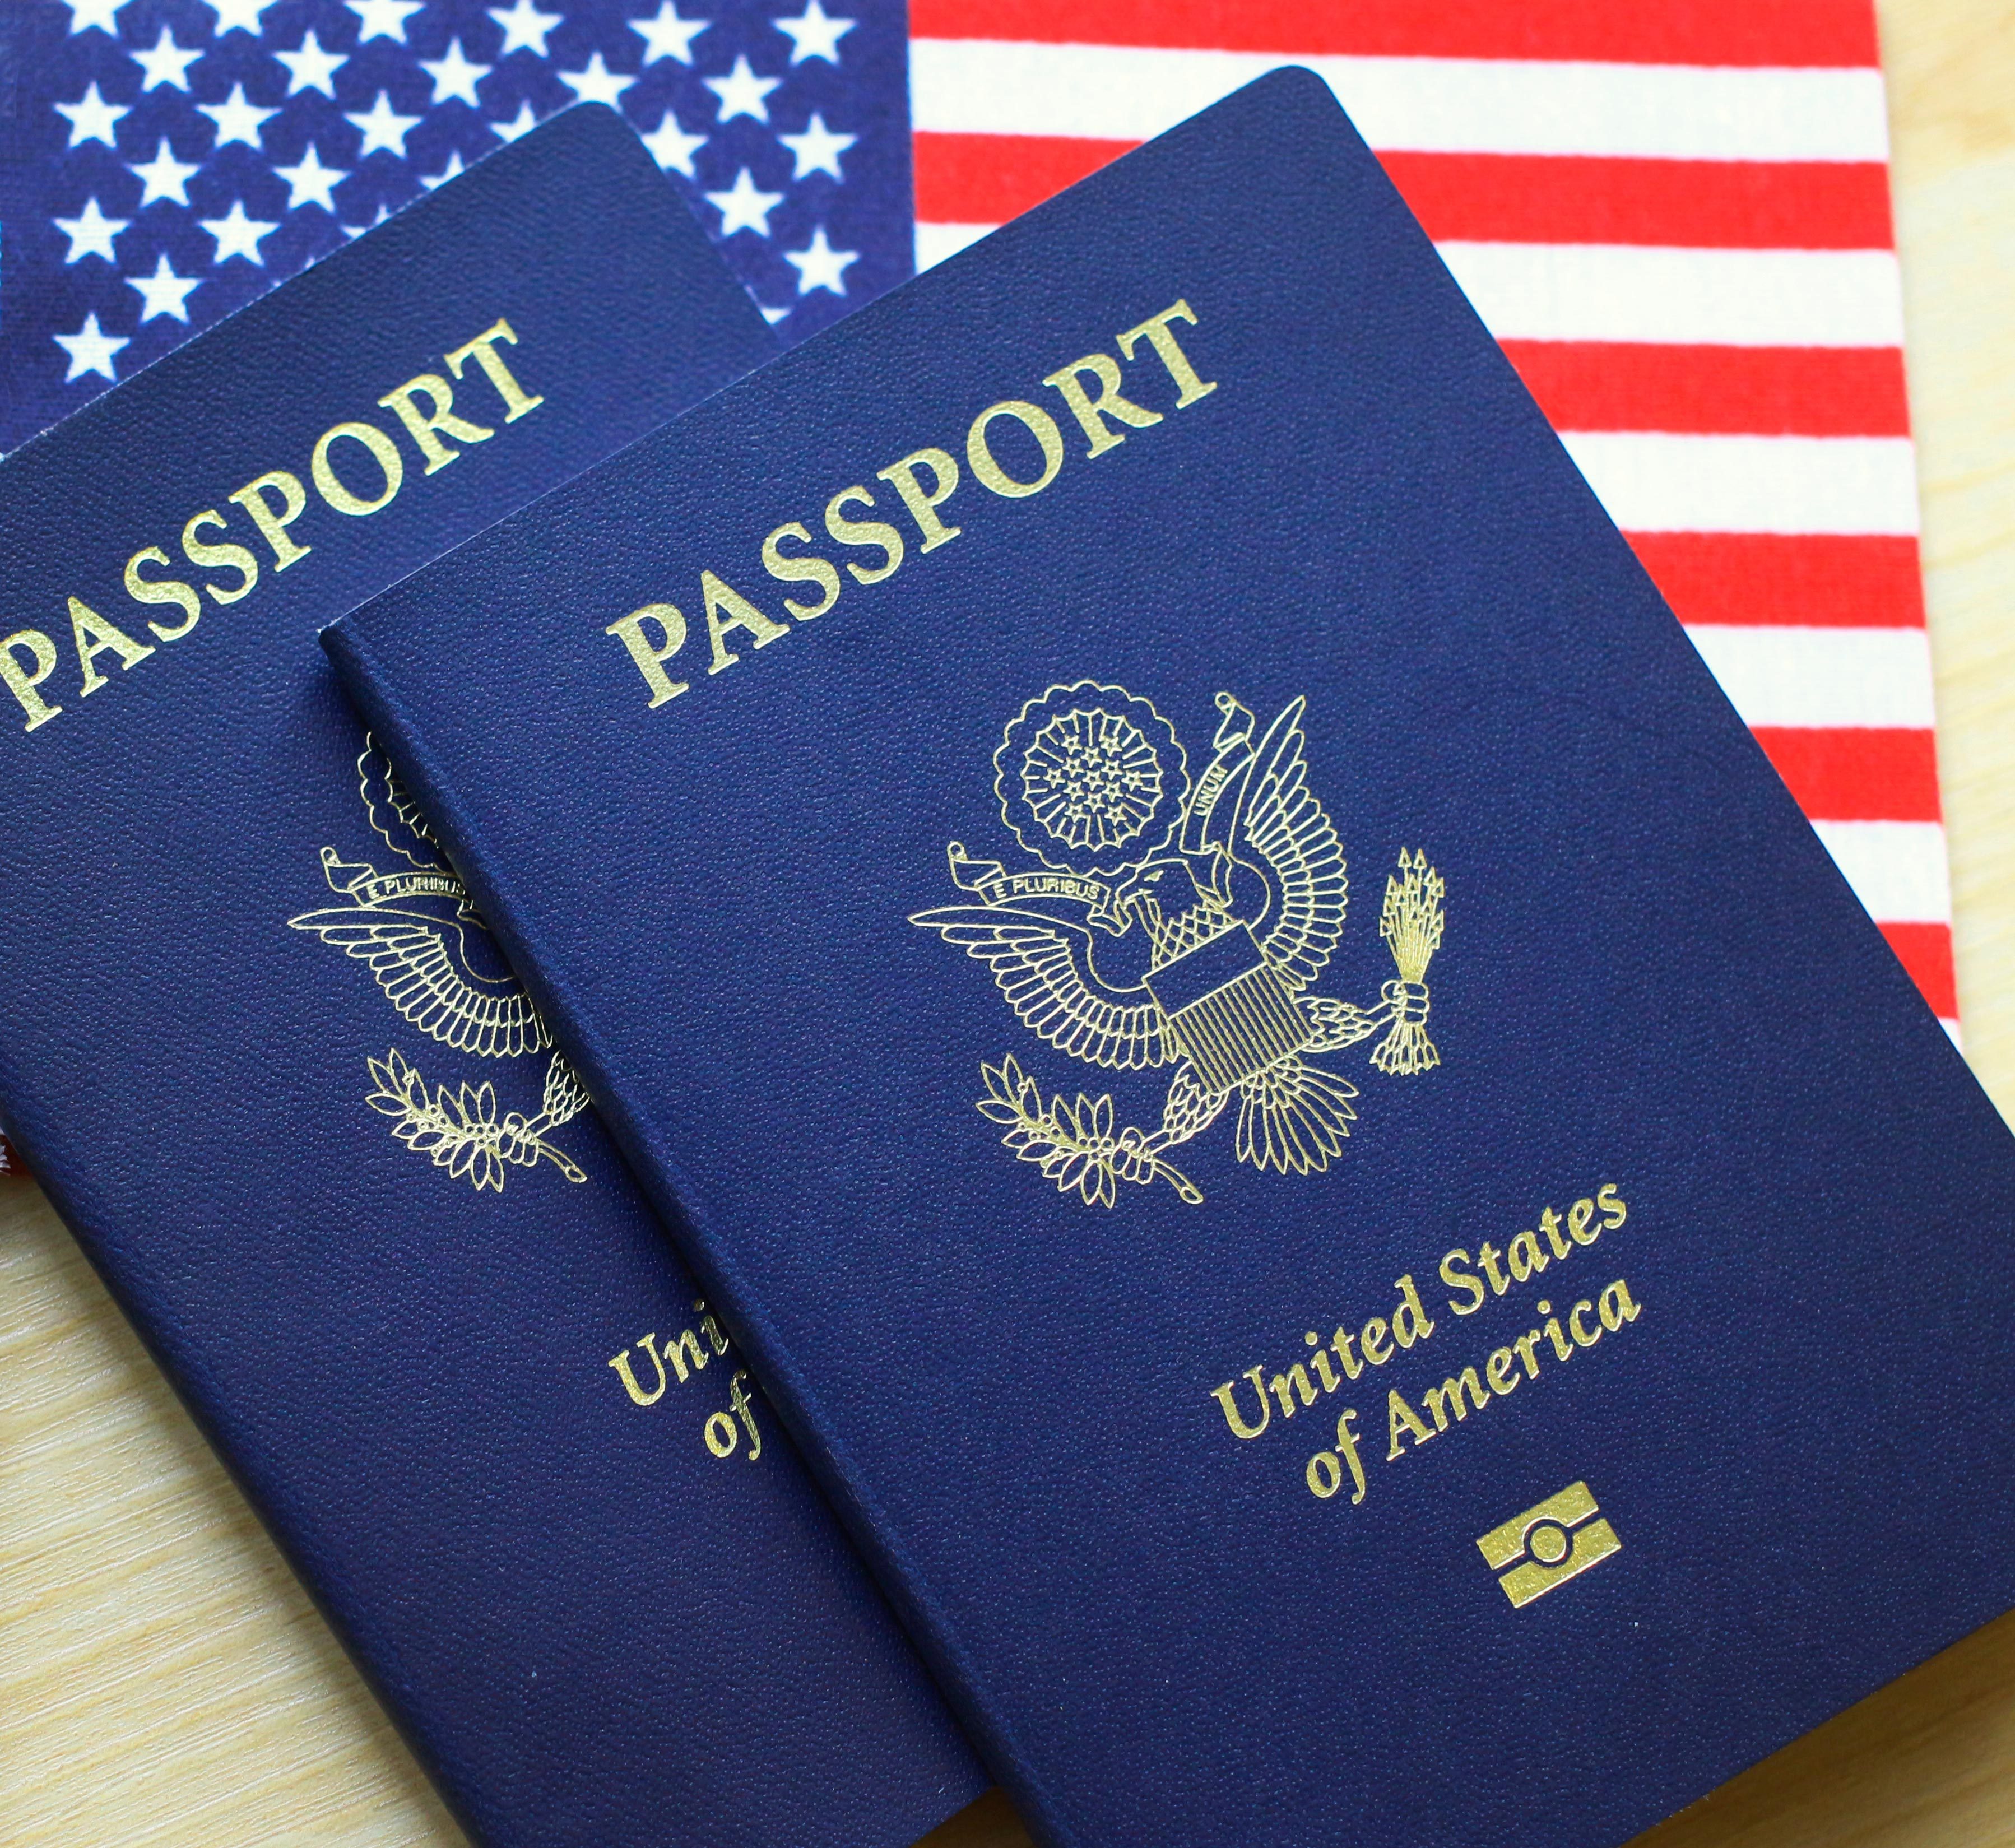 How Long Does It Take to Get a Passport? | Reader's Digest